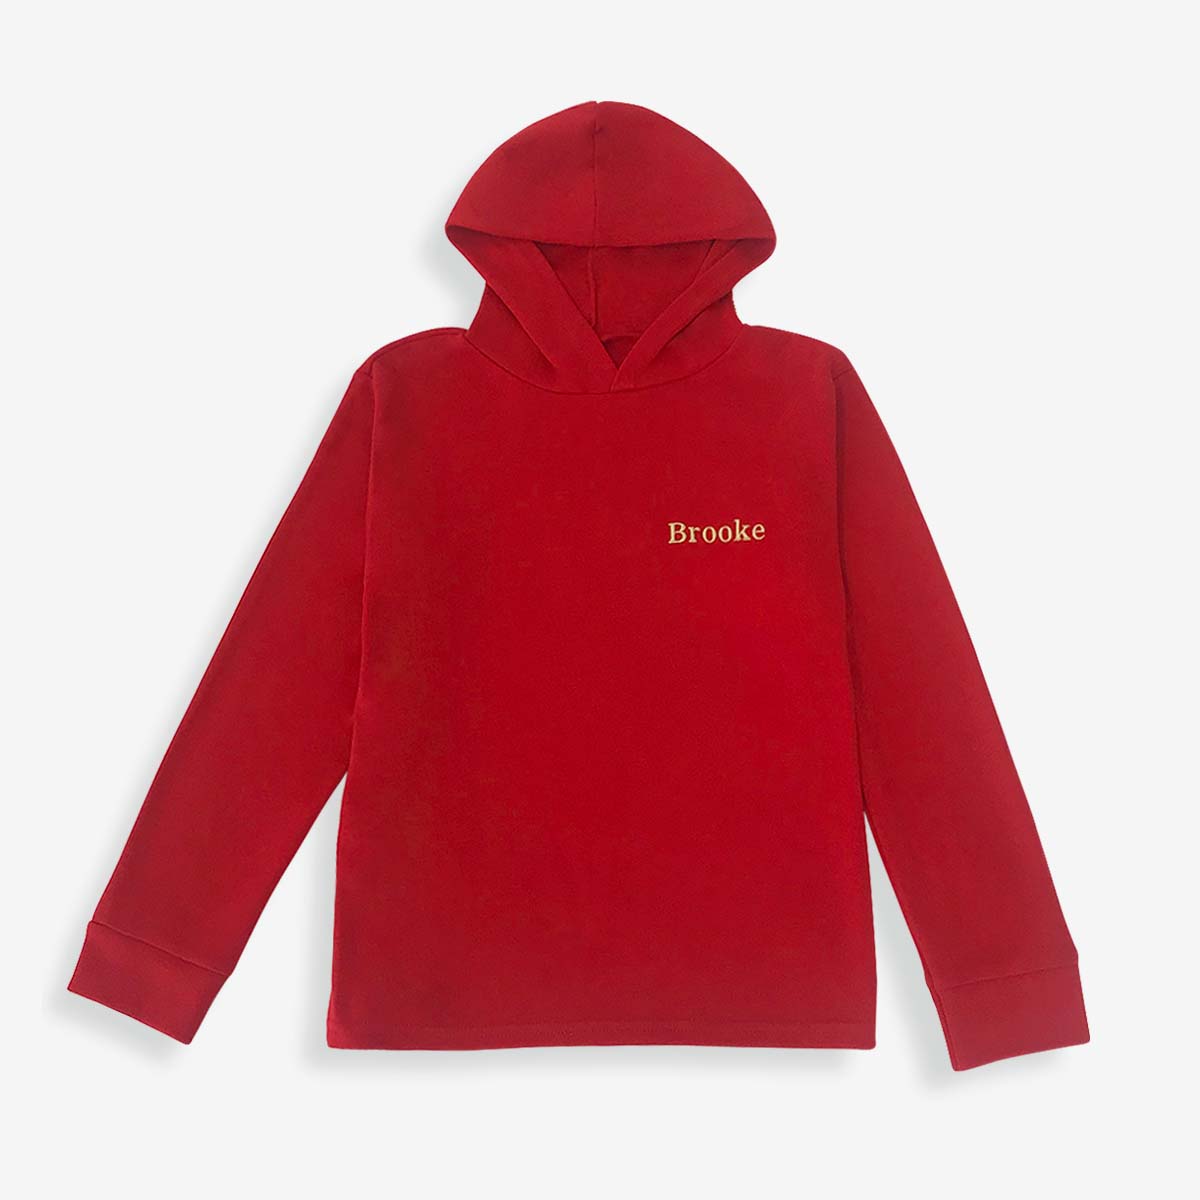 Embroidered Red Hooded Top